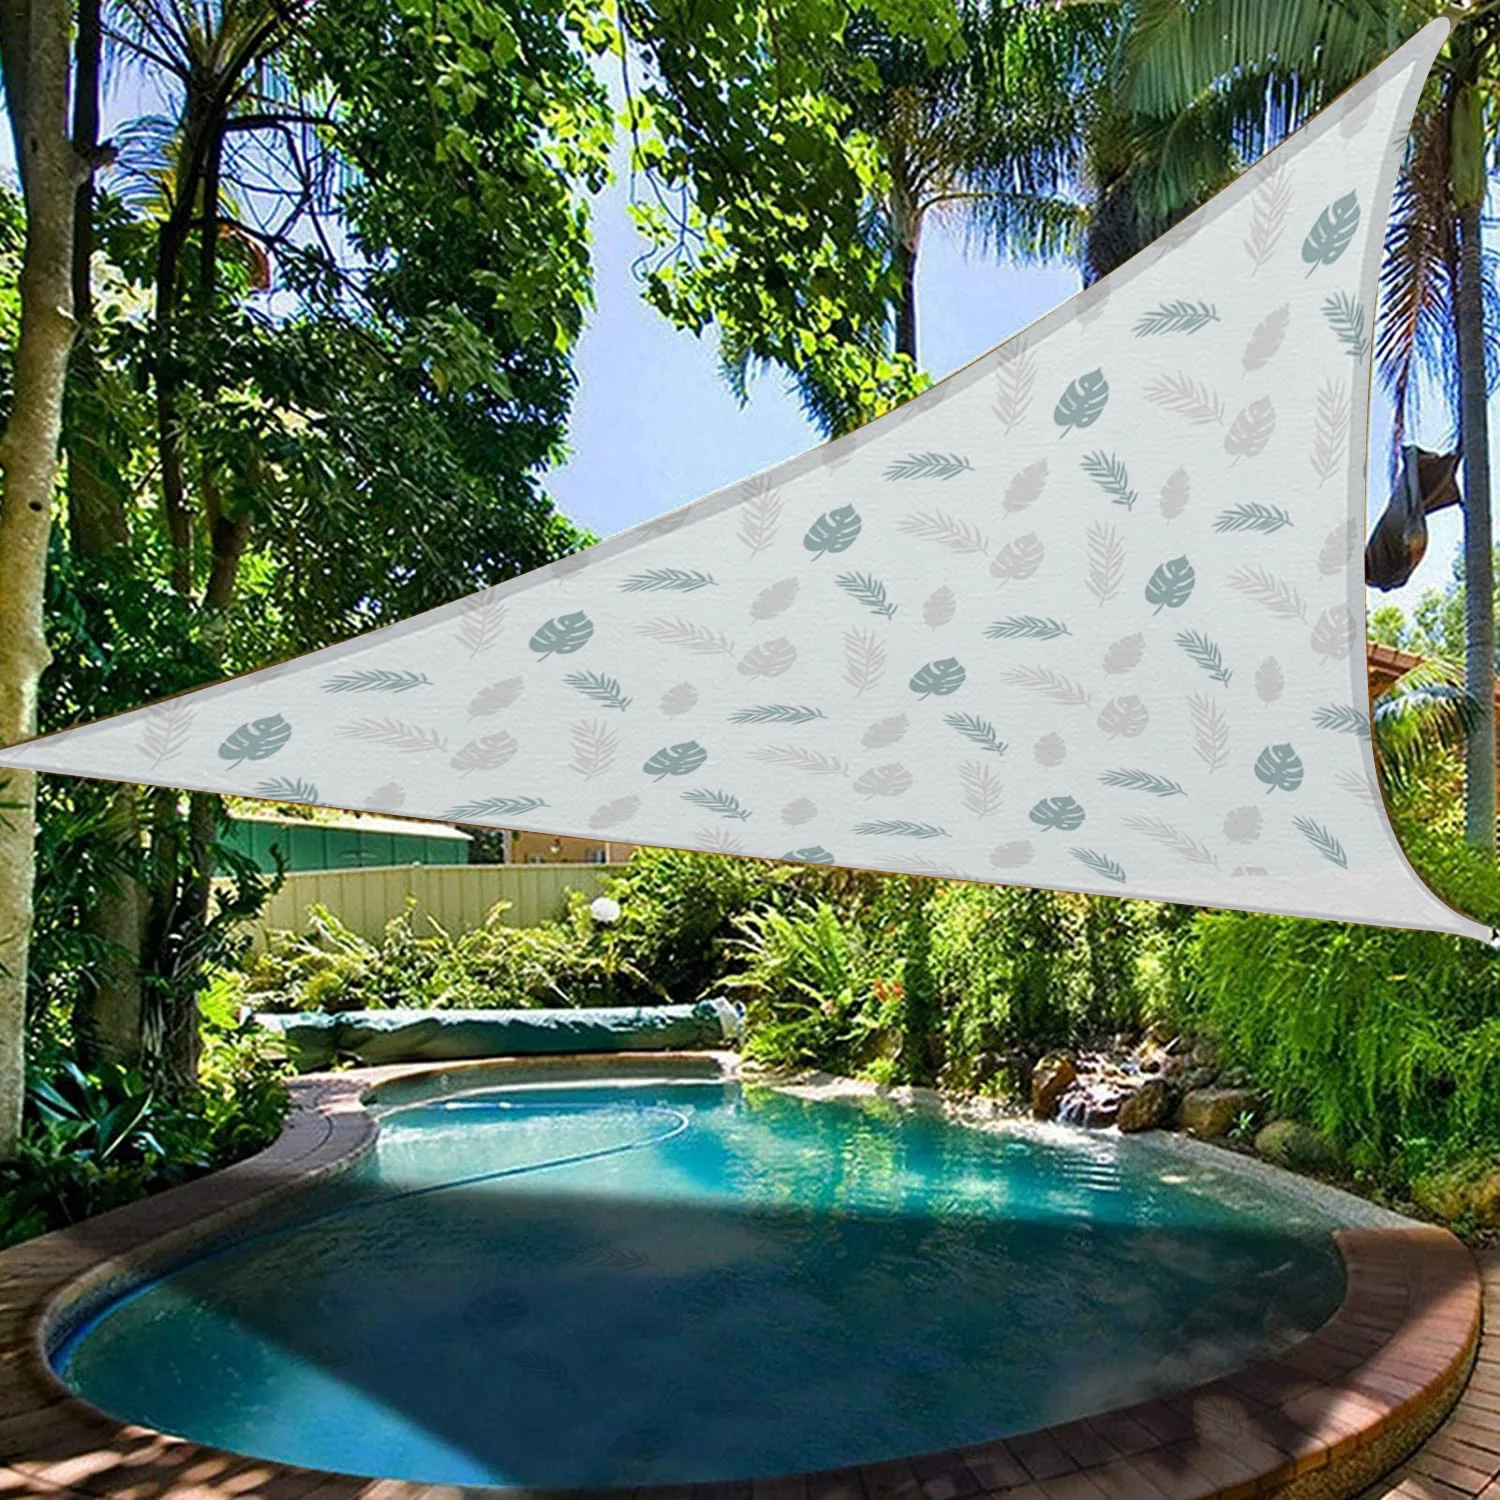 Waterproof Shade Sail Patio Awning Outdoor Garden Pool Sun Canopy Shelter Cover 